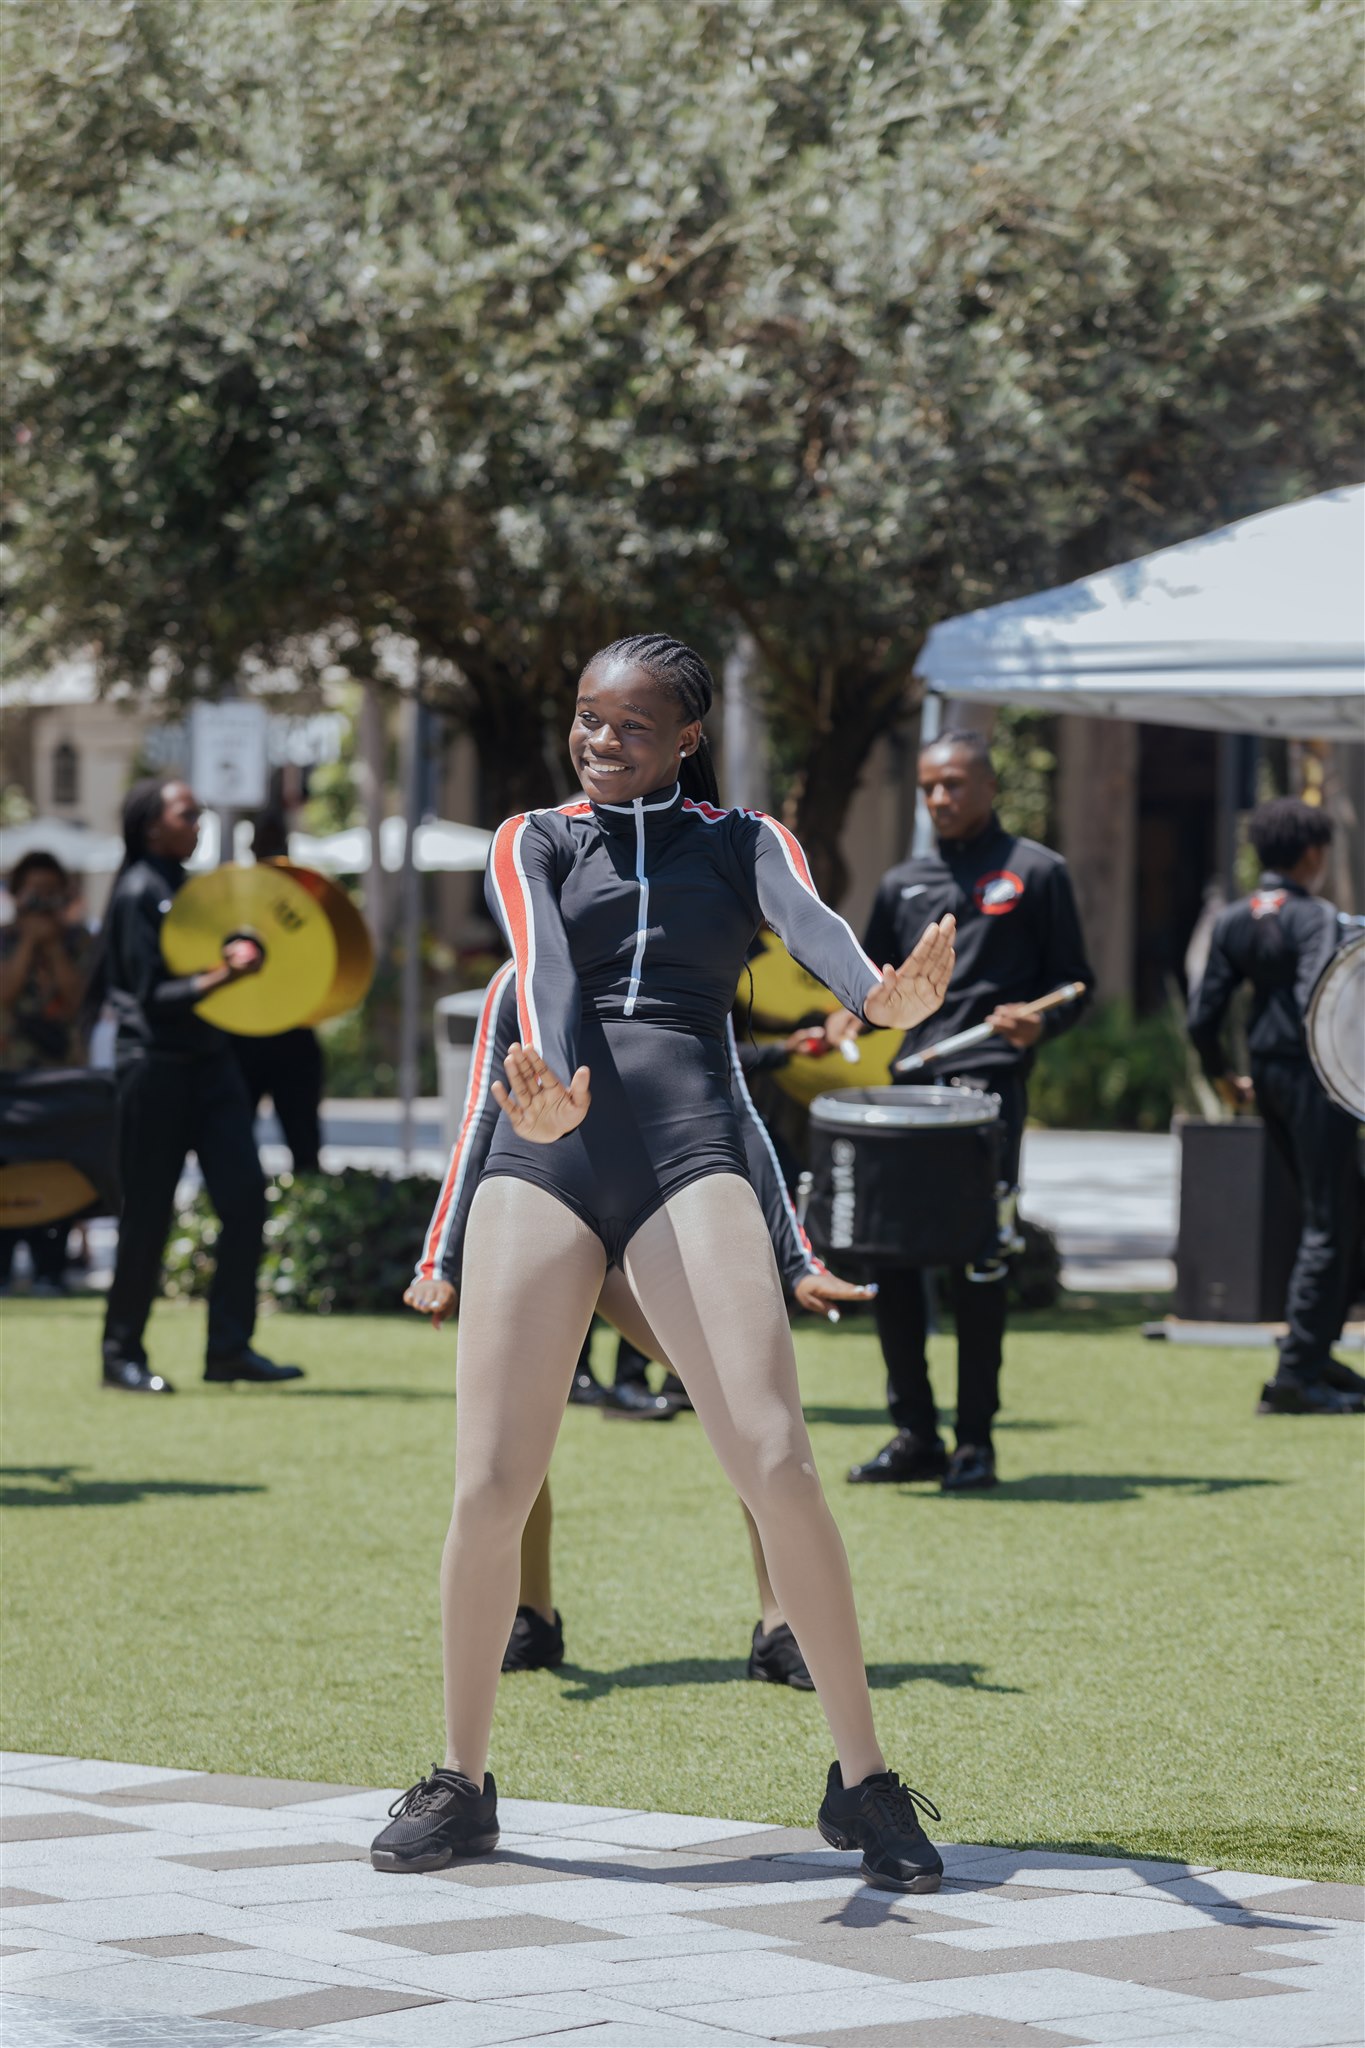 Dancer Leading marching band on the lawn